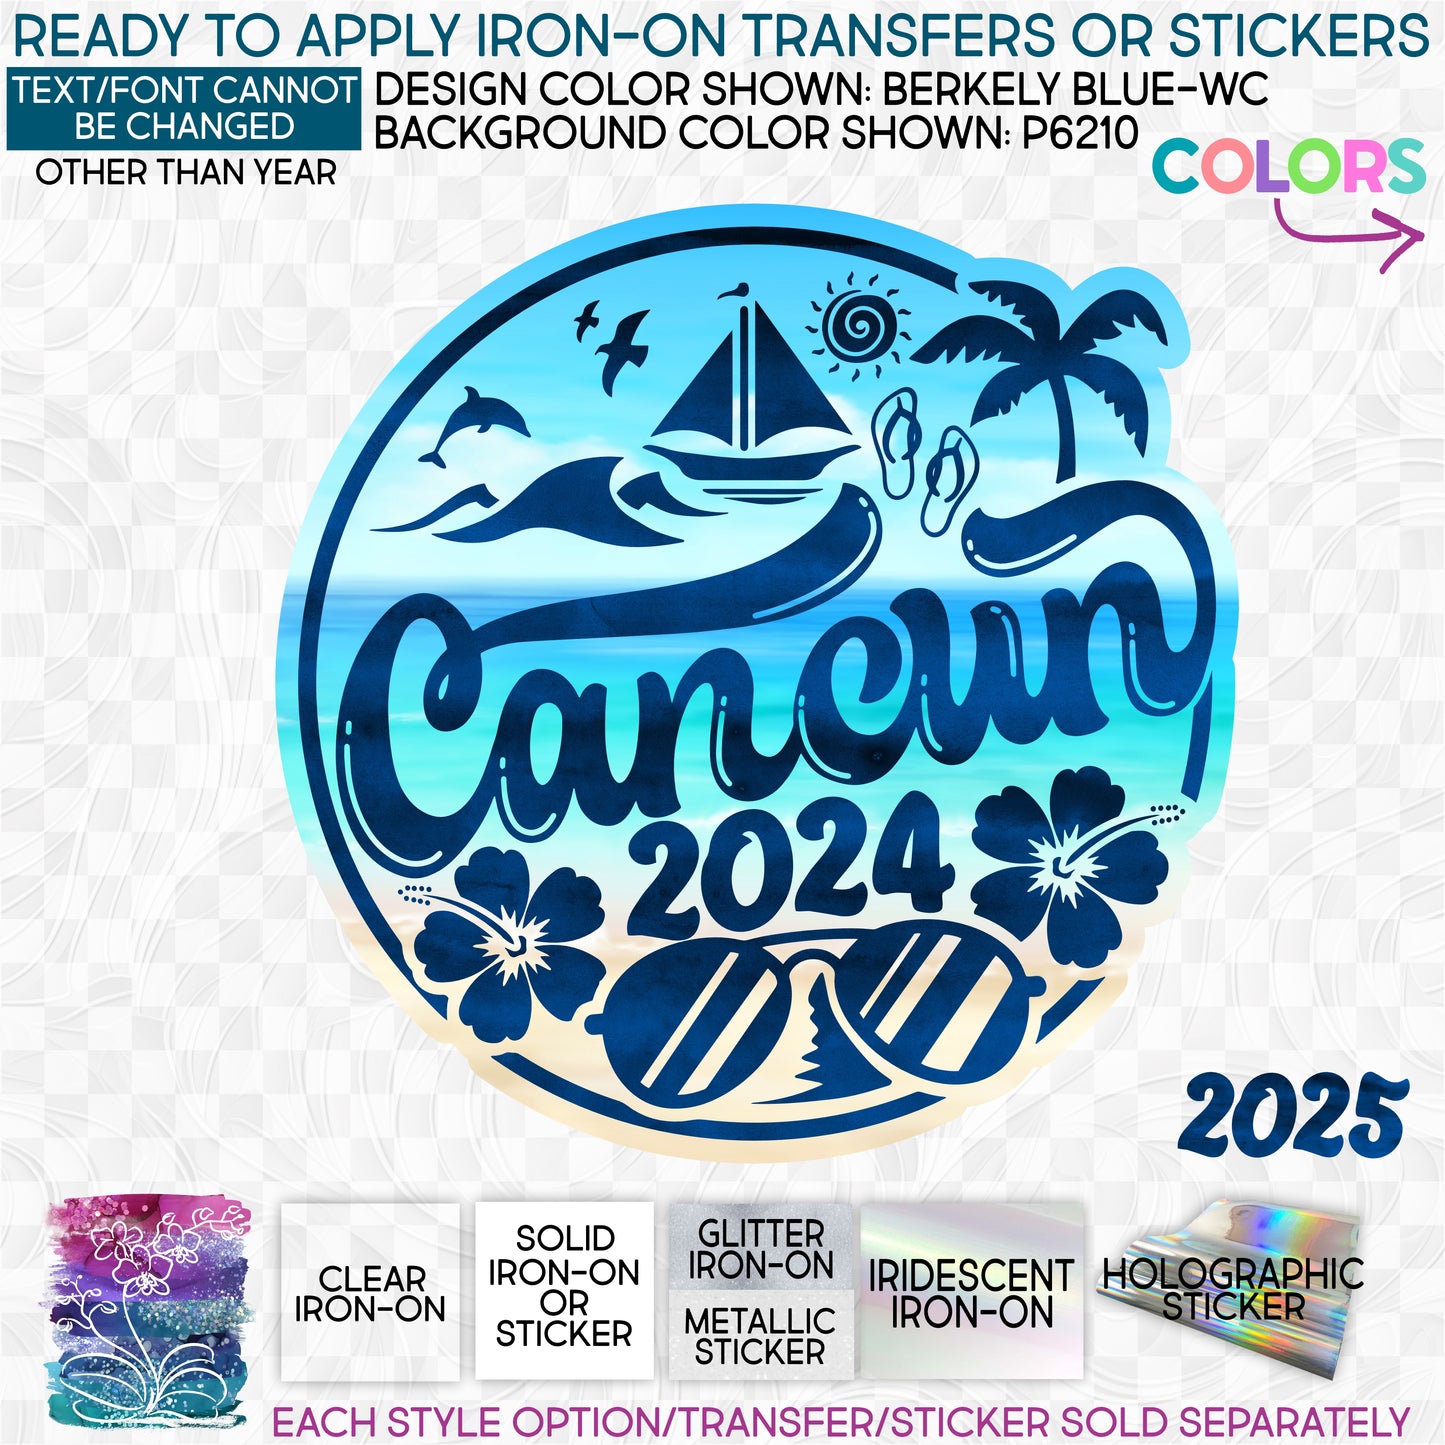 (s329-N5) Cancun 2023 2024 Any Year Glitter or Vinyl Iron-On Transfer or Sticker